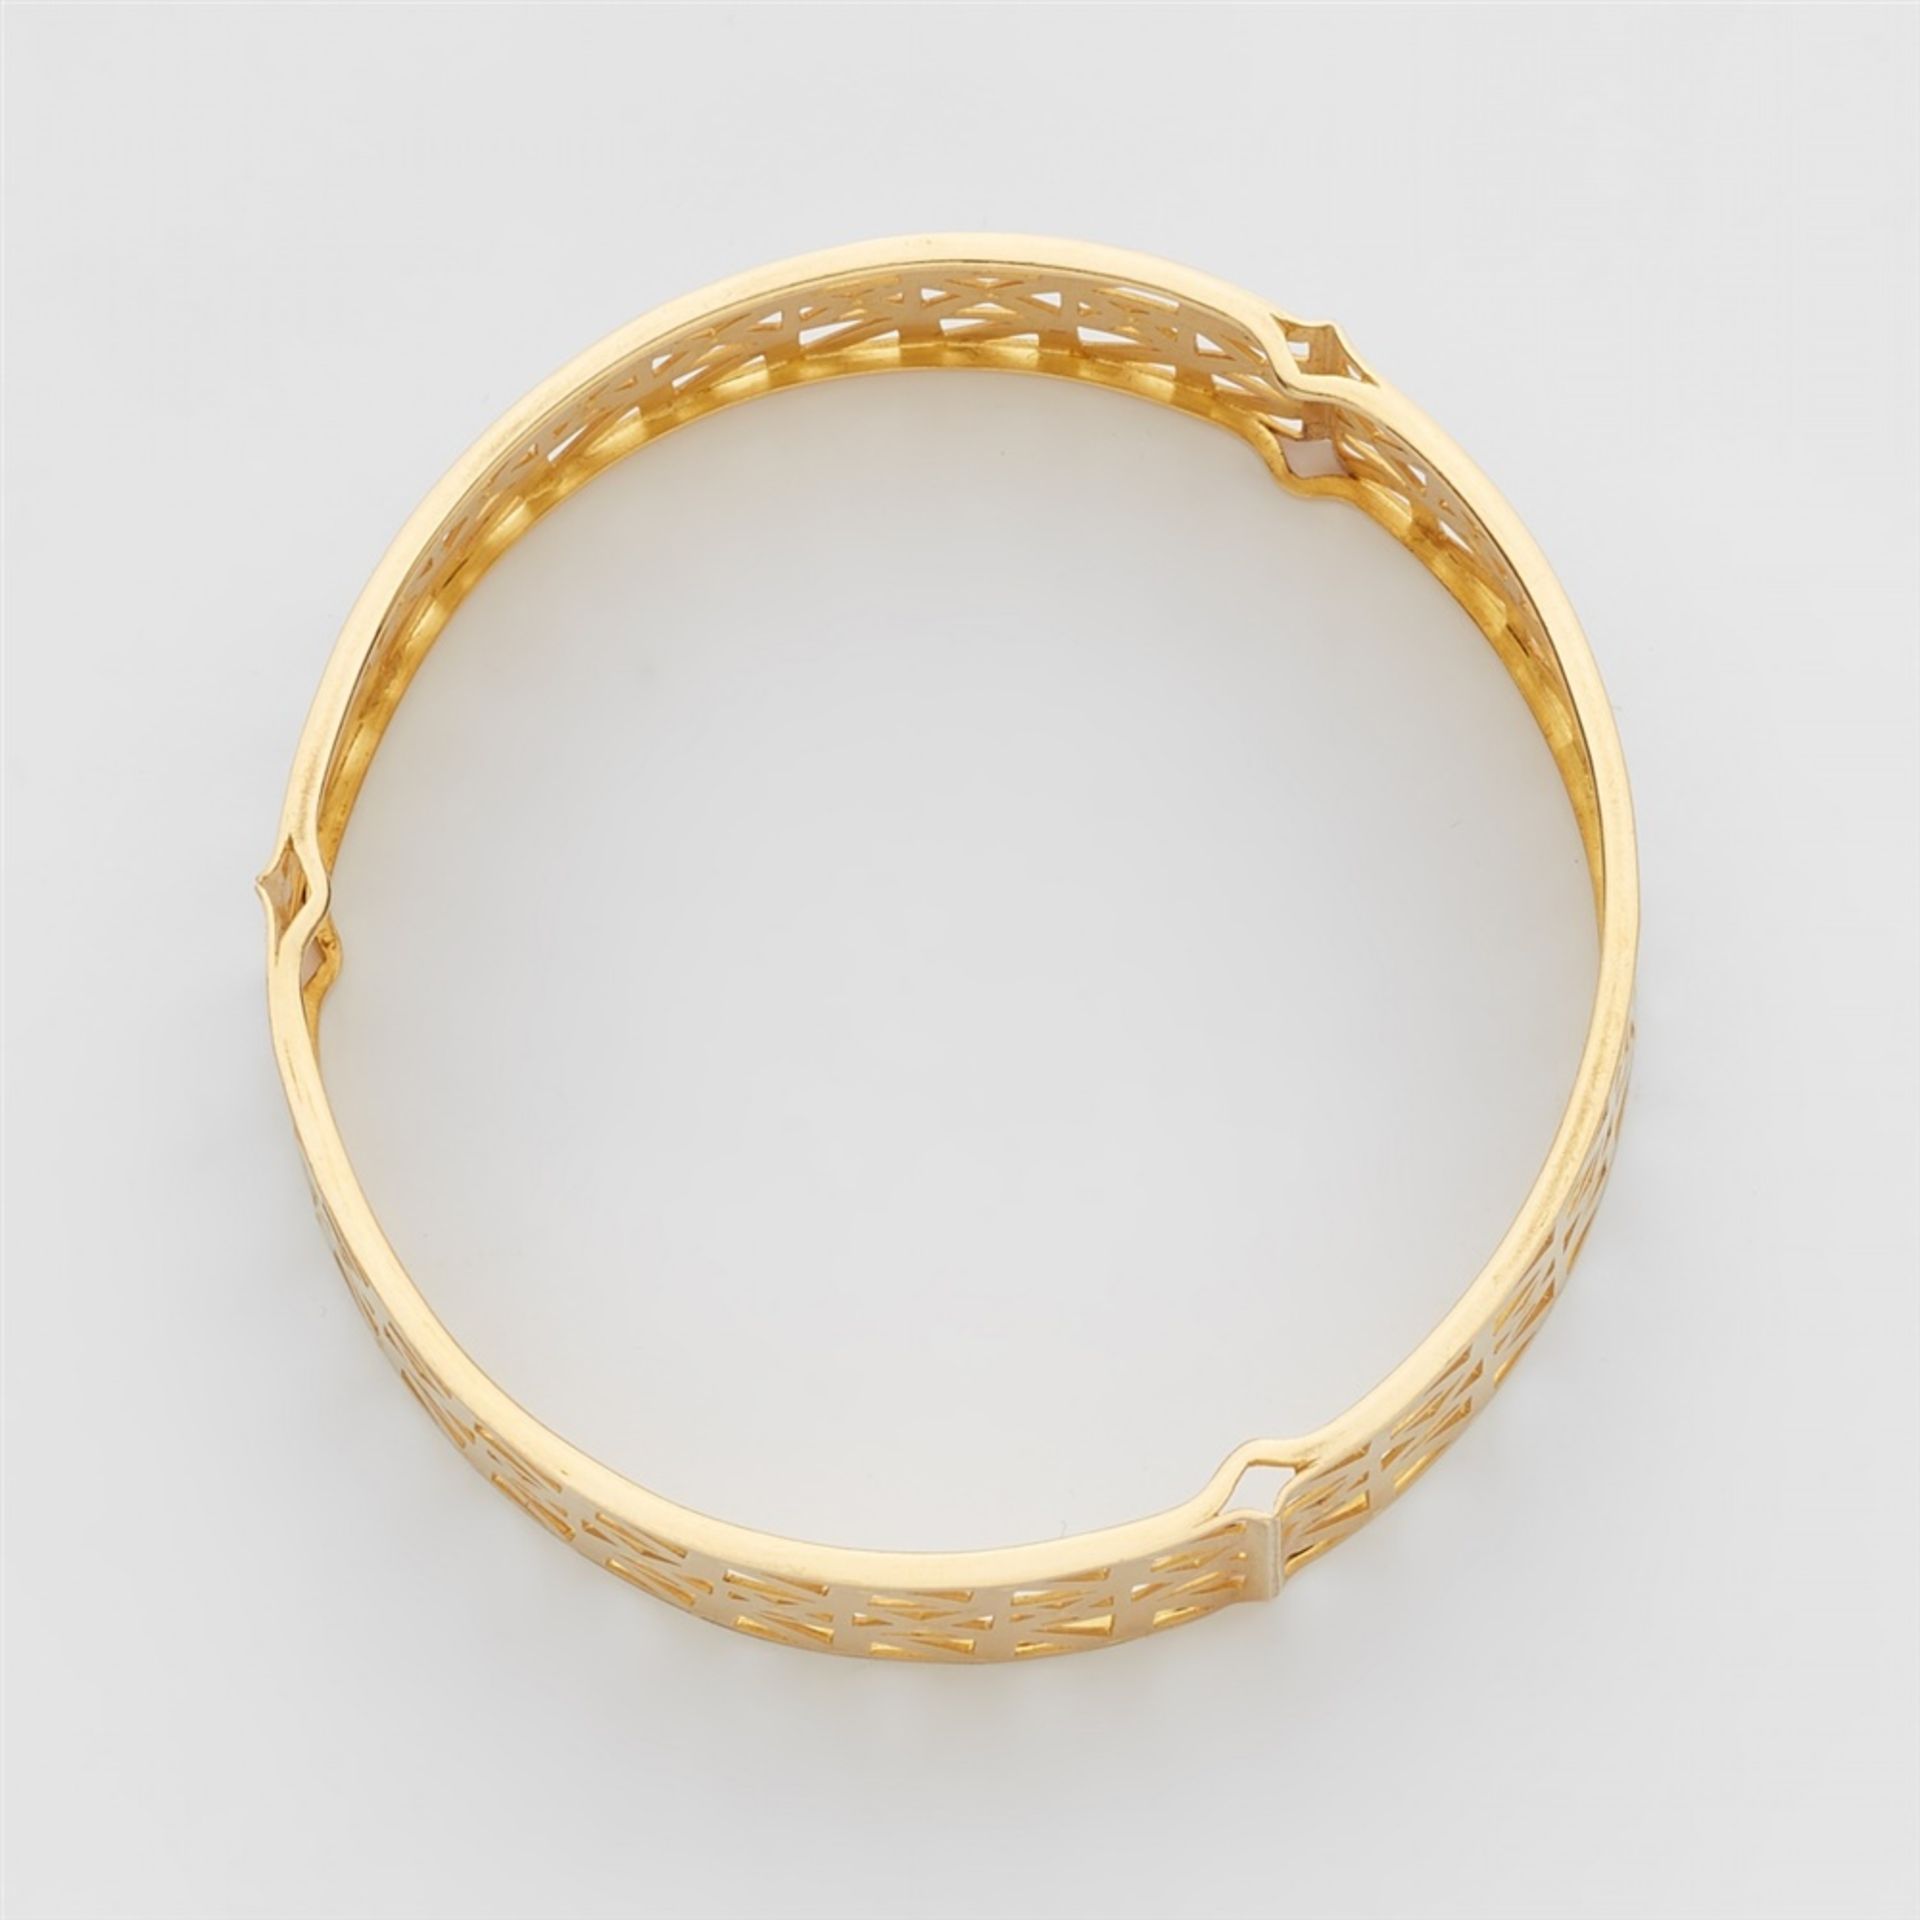 An 18k gold bangleDesigned as a gold band with fine pierced geometric decor and embossing. W 2 cm. - Bild 3 aus 3